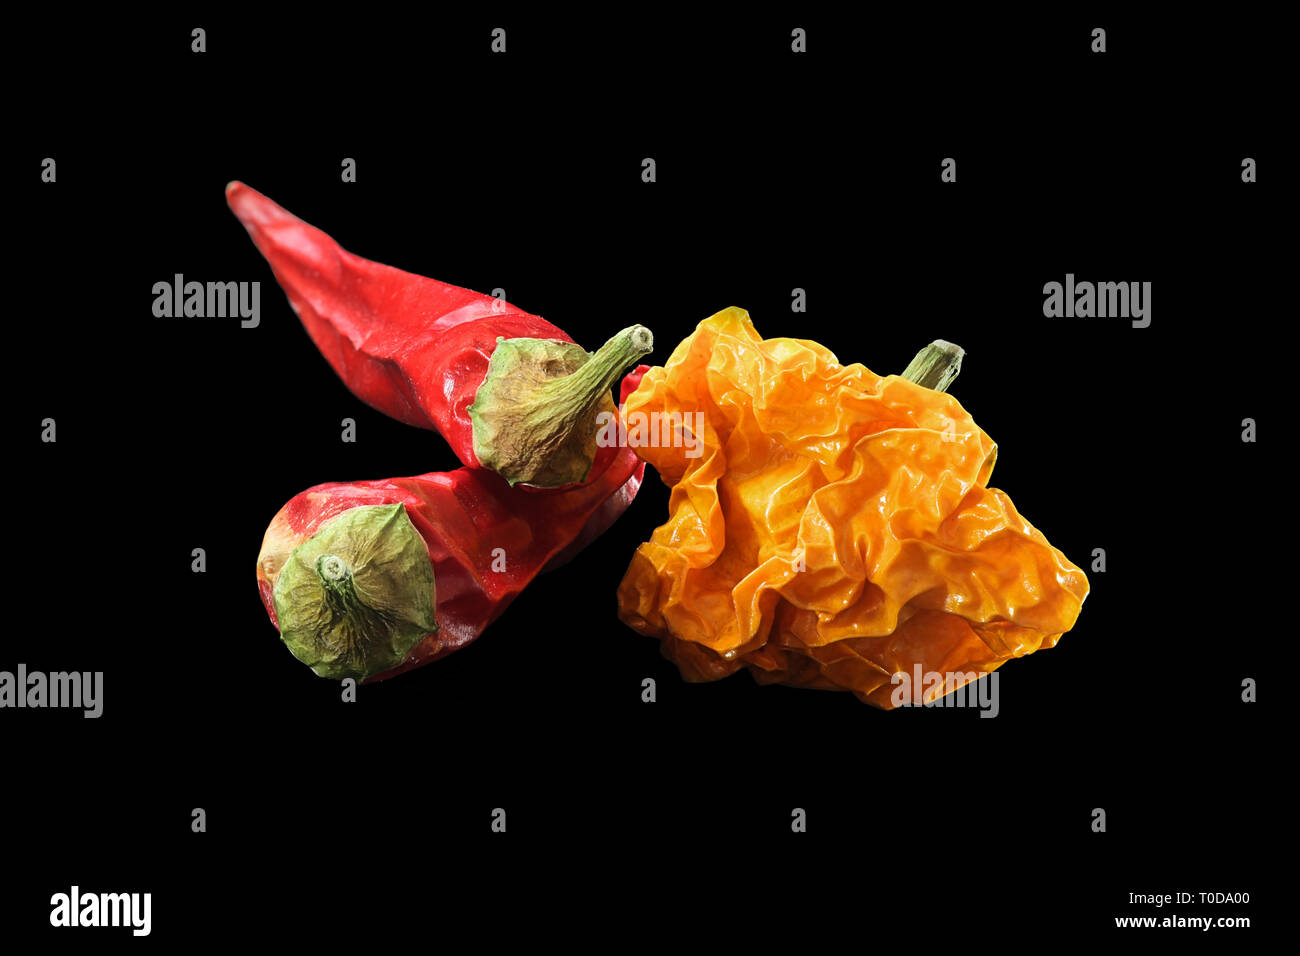 Red chili peppers and yellow habanero on black background Stock Photo